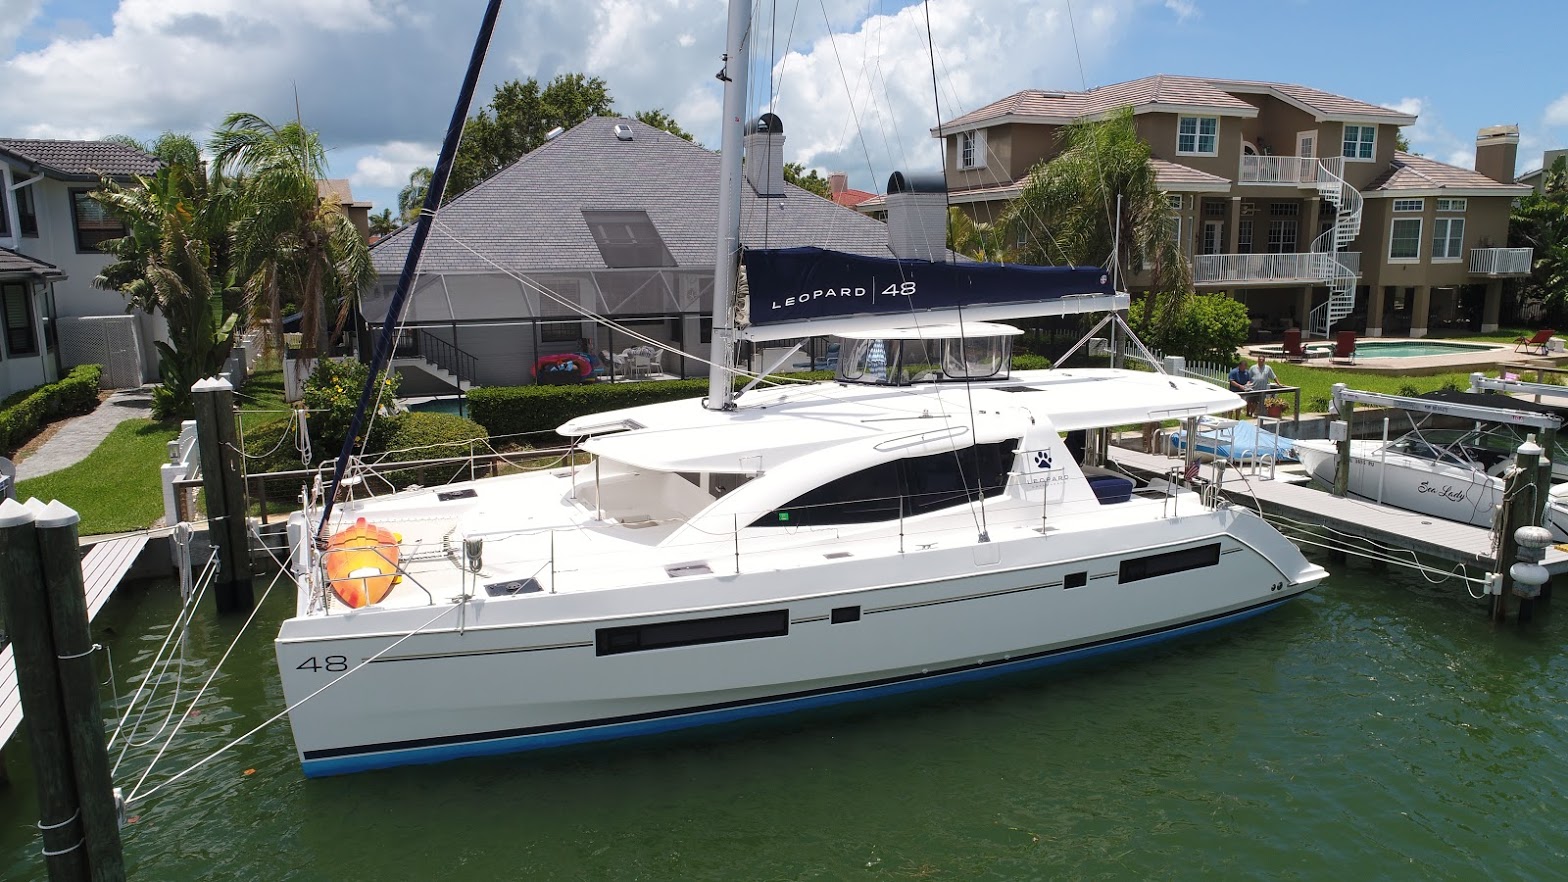 Used Sail Catamaran for Sale 2015 Leopard 48 Boat Highlights